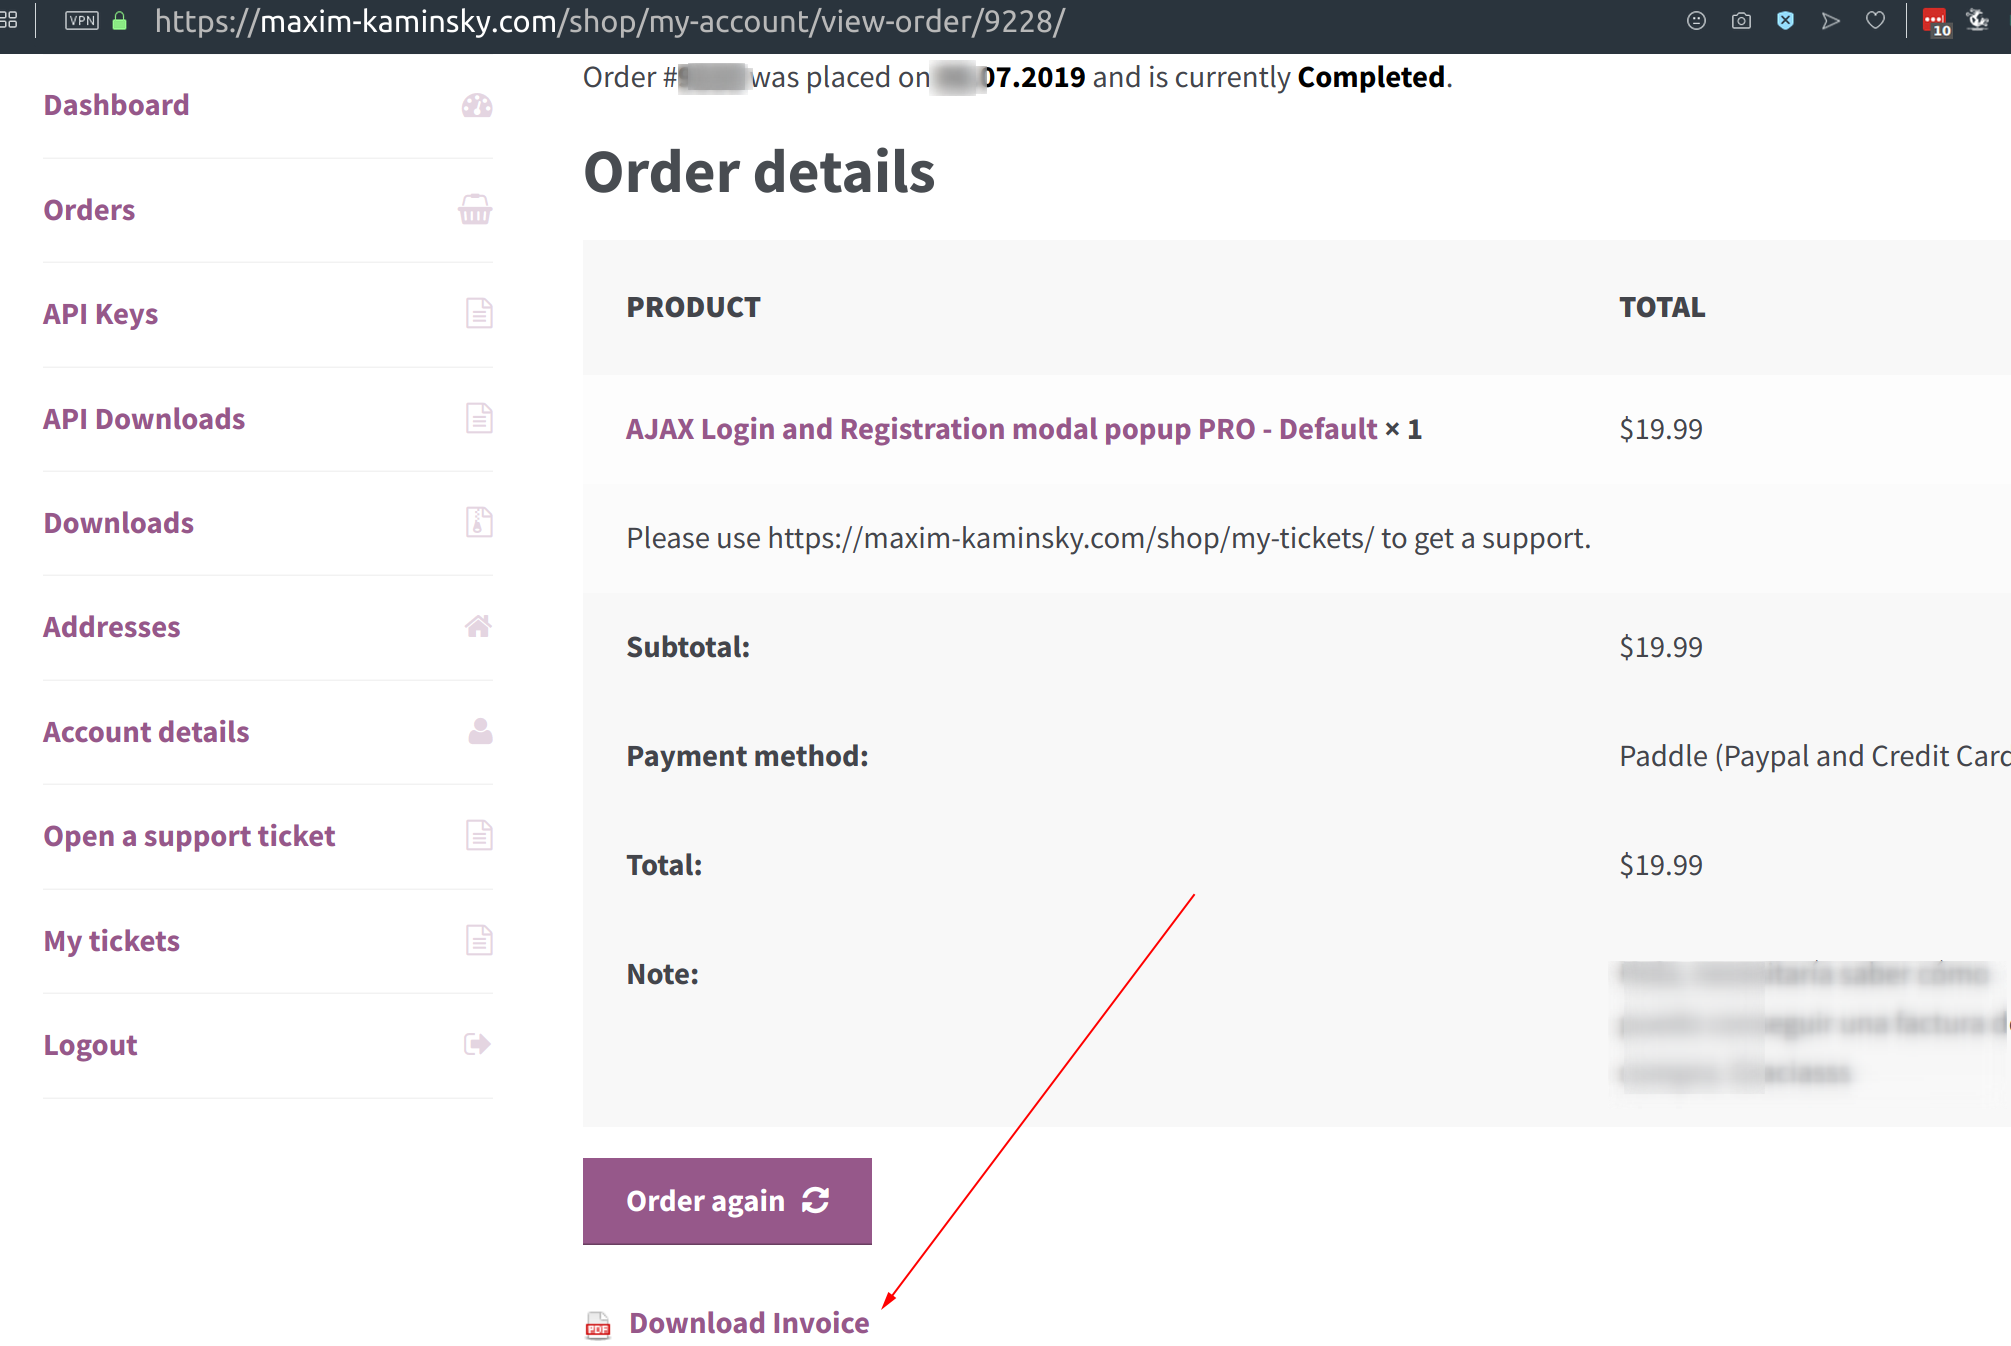 How to generate PDF invoice for your order – AJAX login registration ...